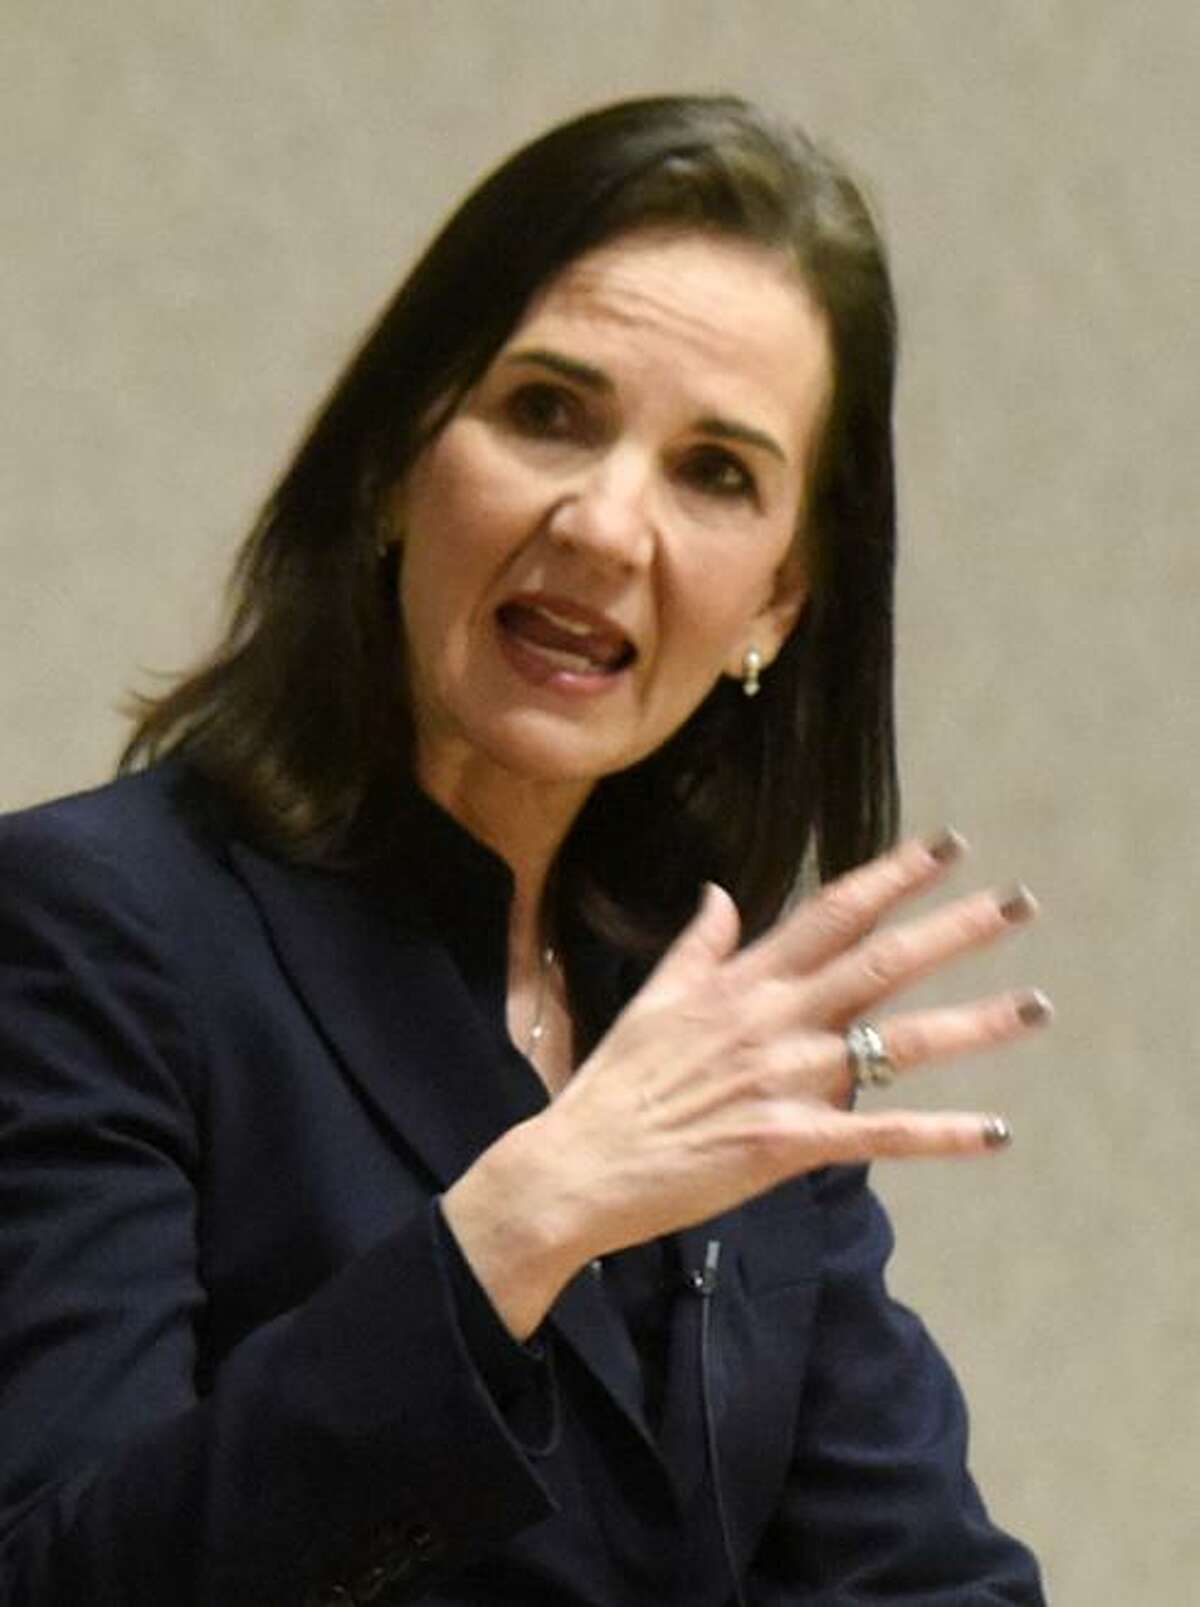 Deirdre M. Daly, U.S. attorney for the District of Connecticut, announced her resignation Friday.